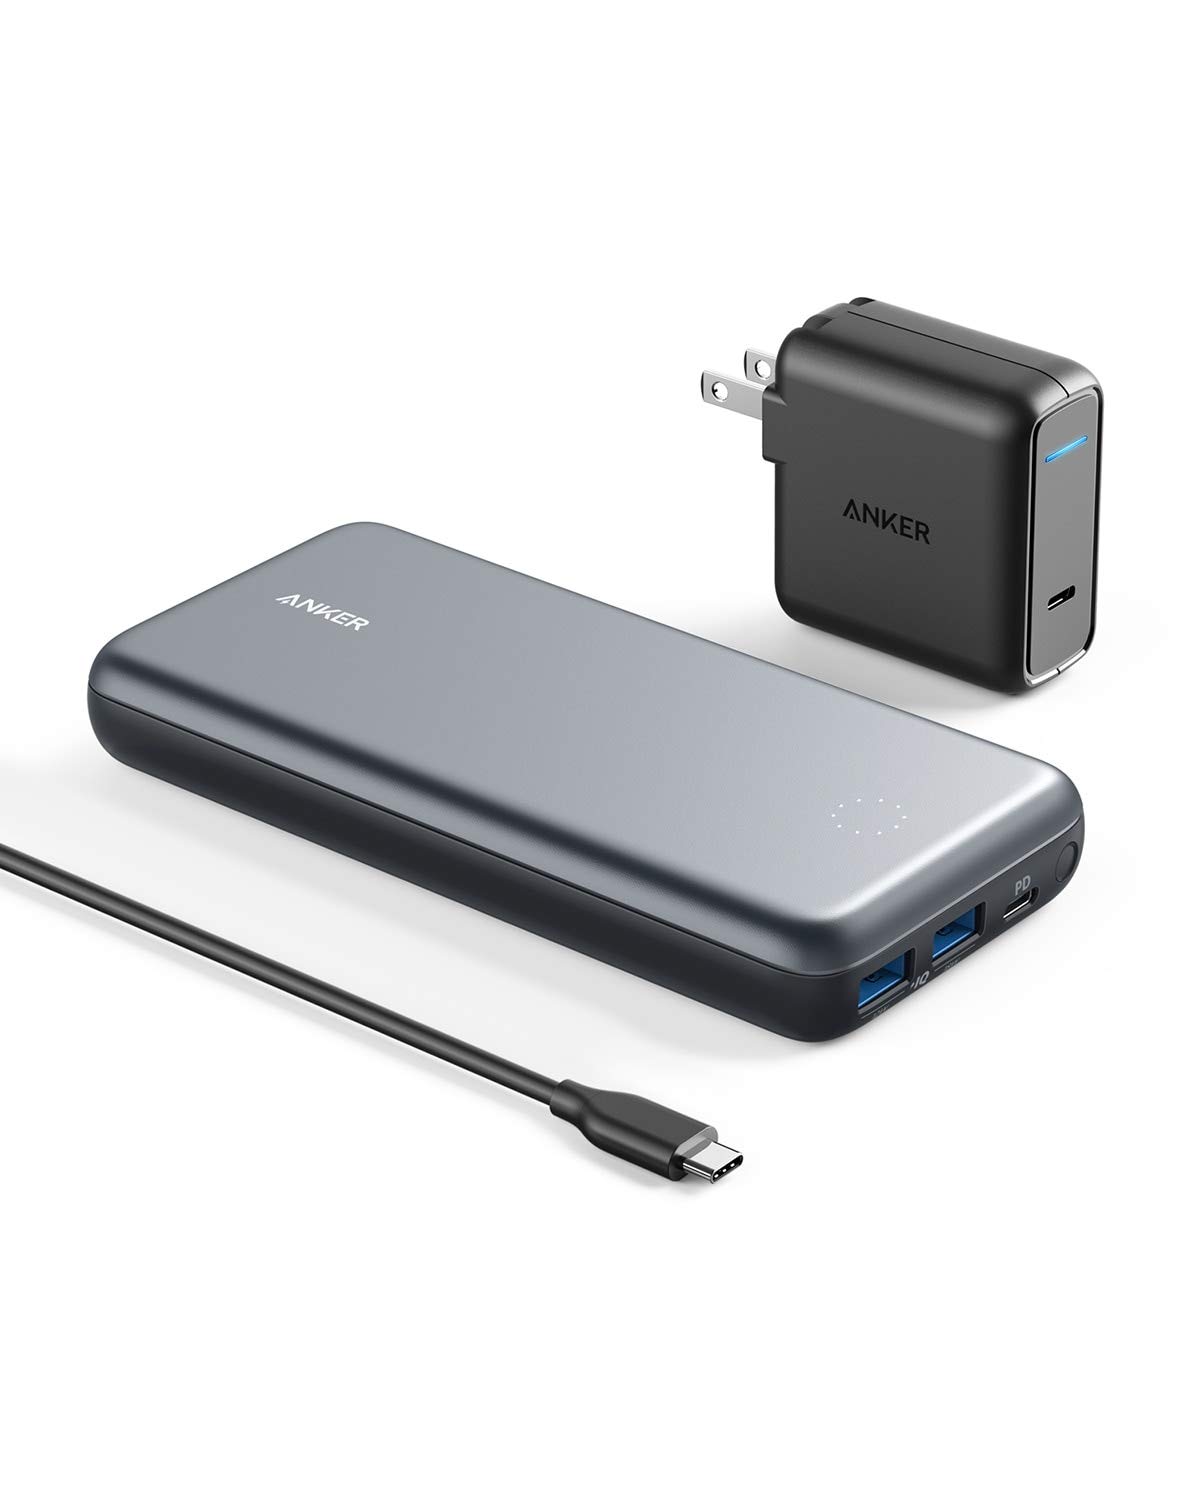 Anker PowerCore+ 19000 PD Hybrid Portable Charger and USB-C Hub On Sale for 42% Off [Deal]